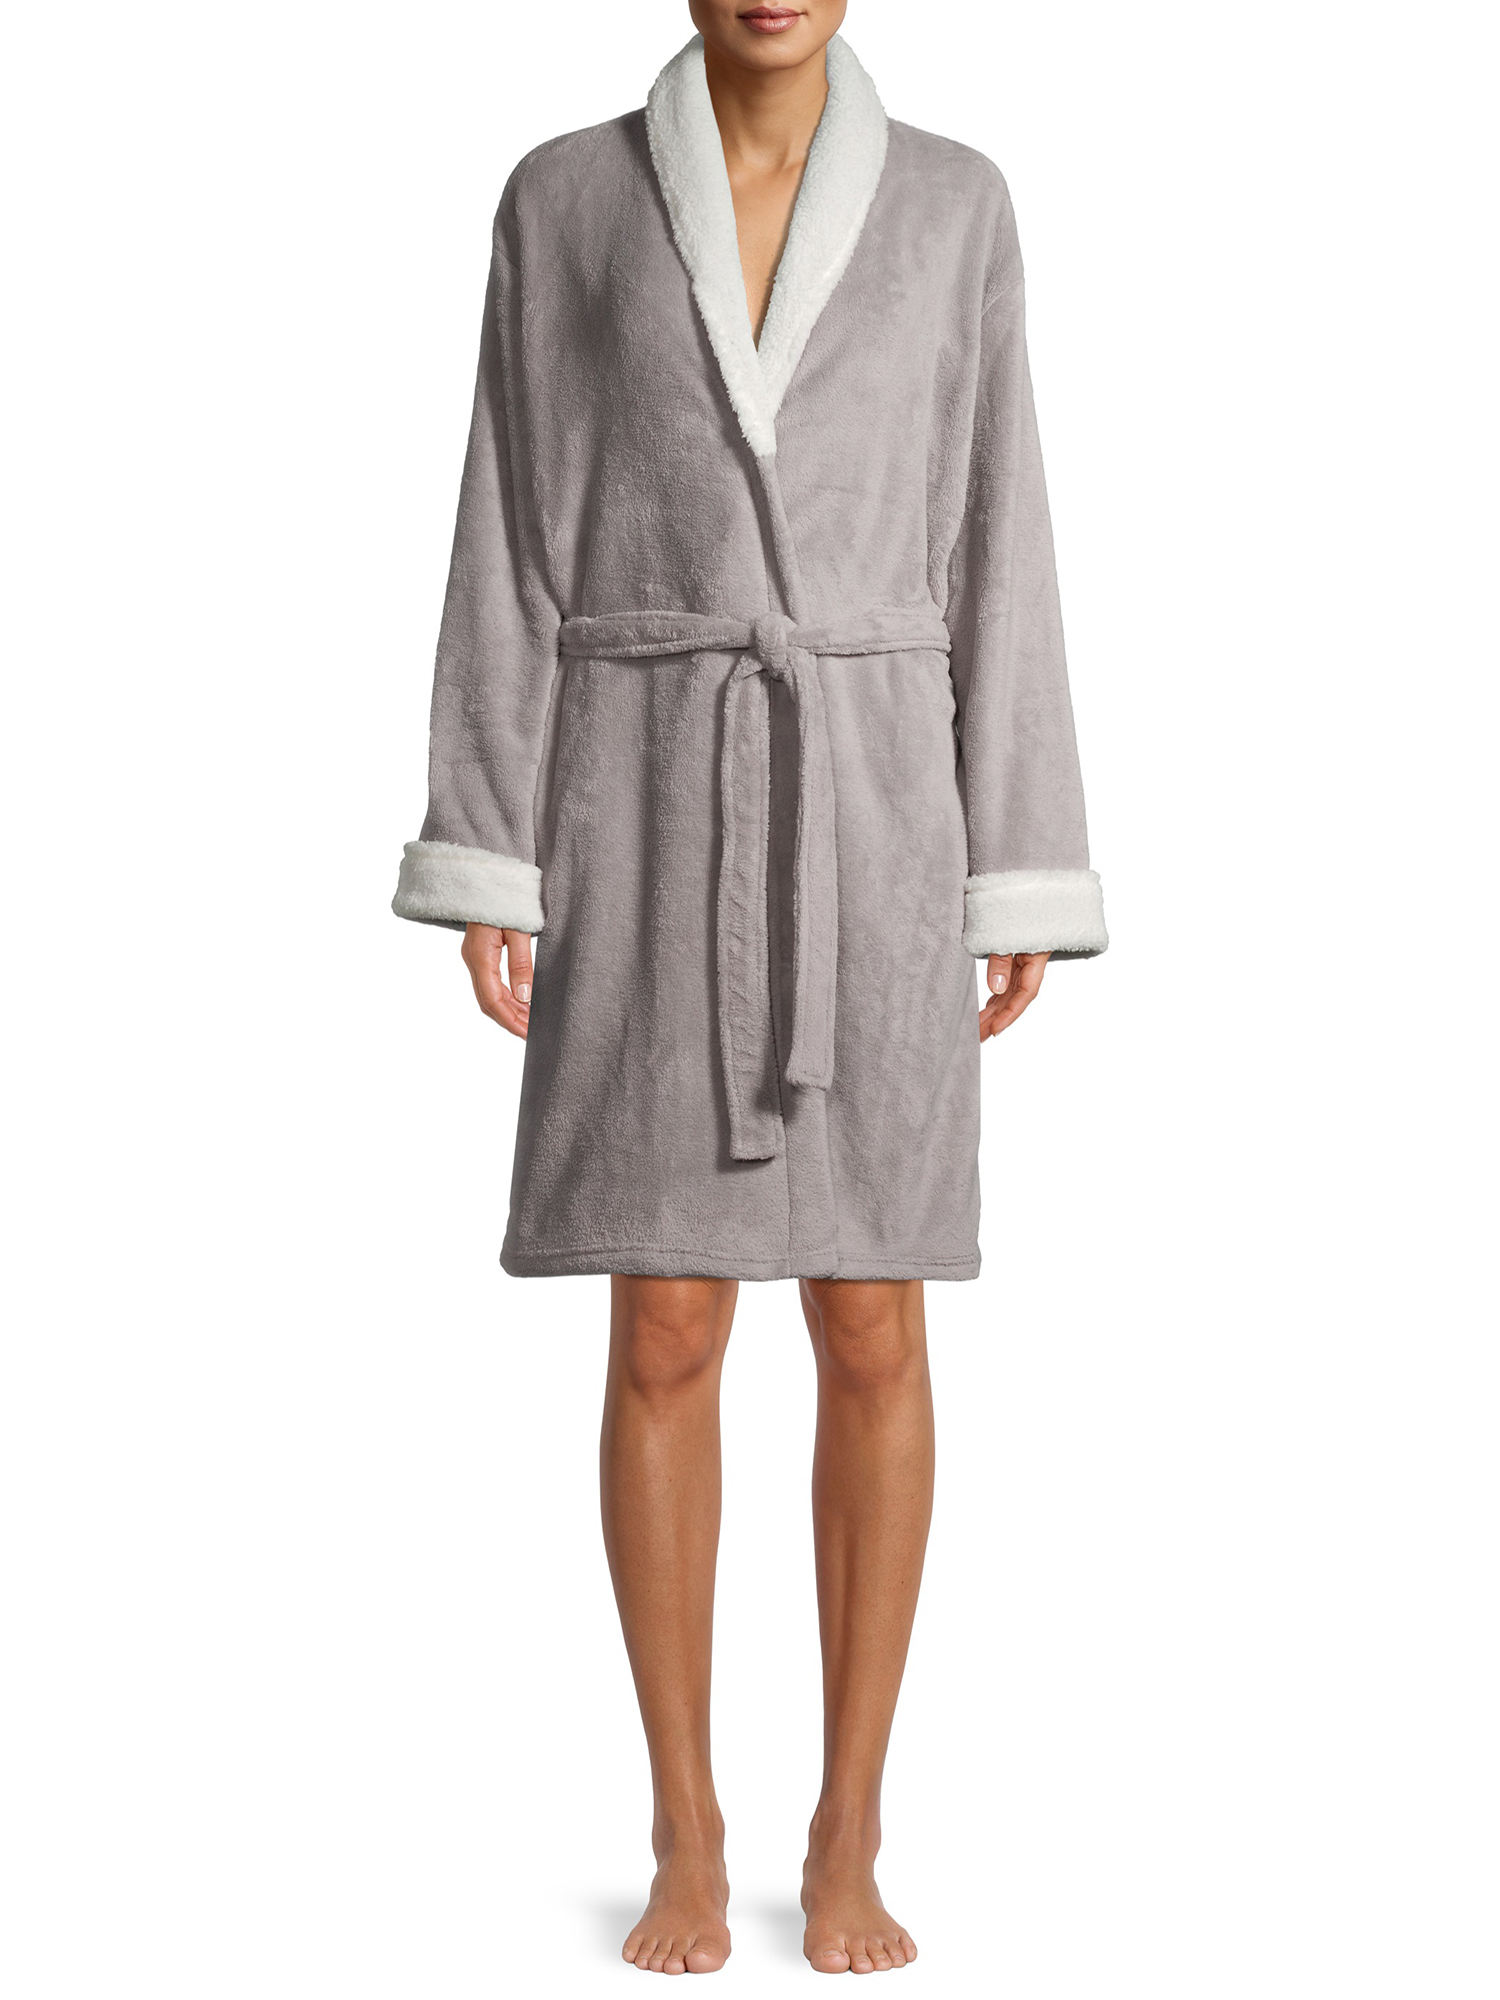 Blue Star Clothing Women's 3/4 Length Plush Robe with Sherpa Trim Collar & Cuffs - image 1 of 6